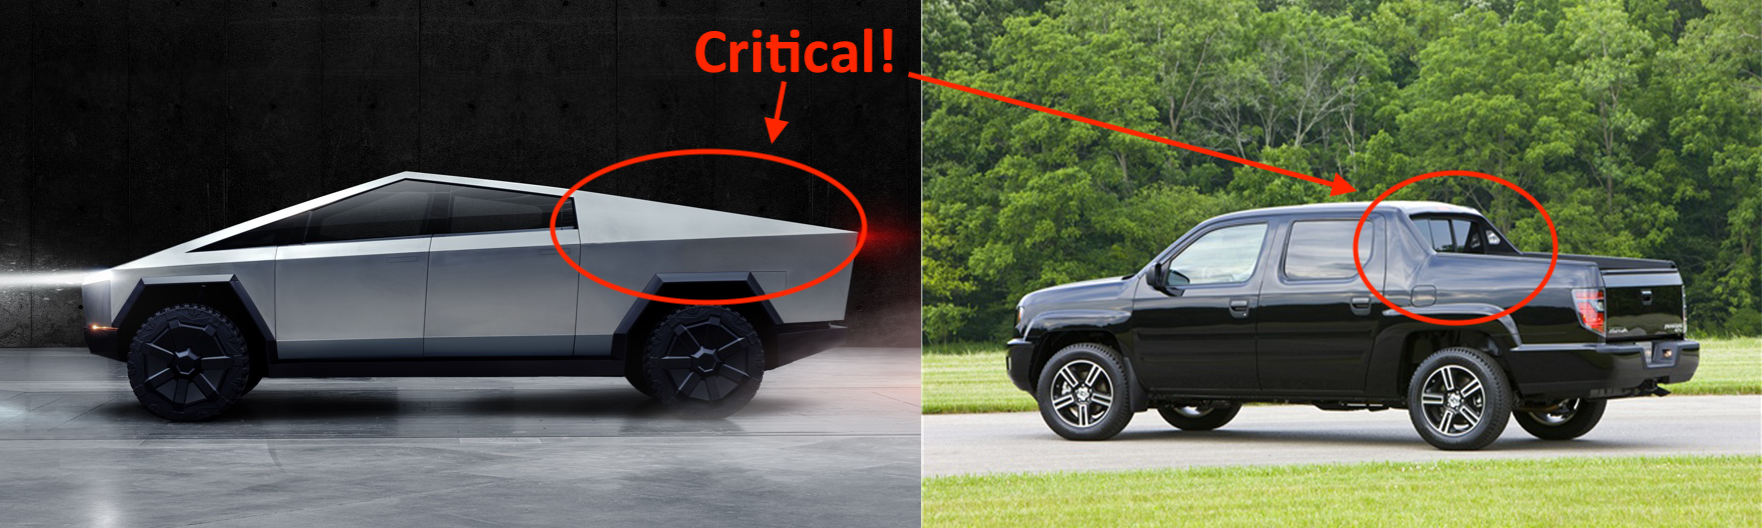 Here’s why the Tesla Cybertruck has its crazy look